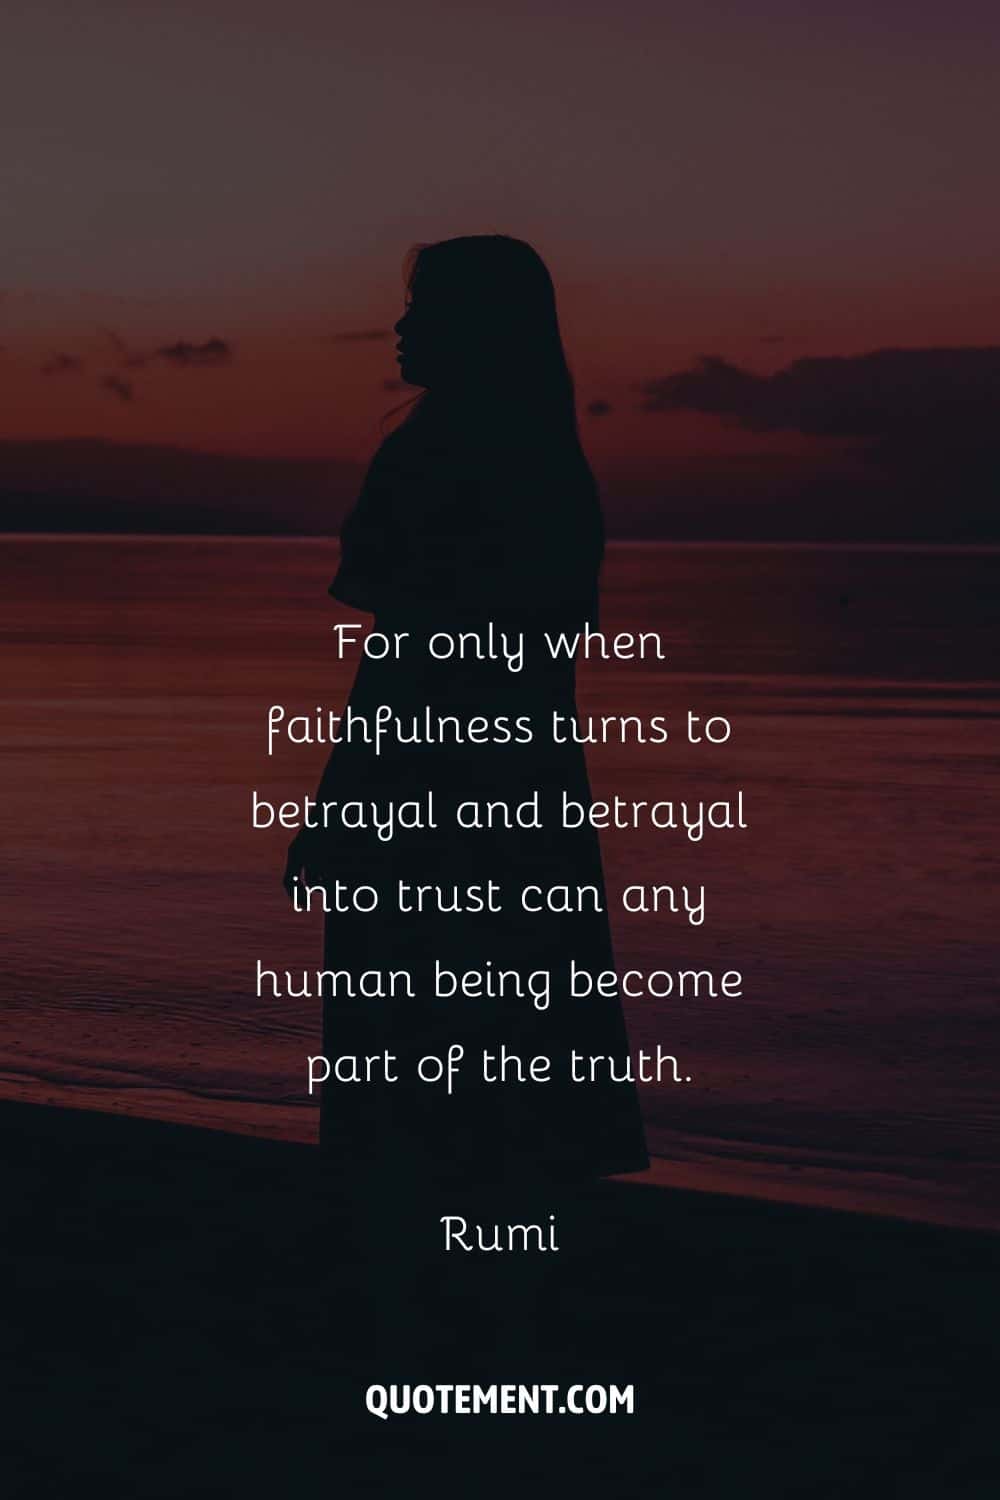 “For only when faithfulness turns to betrayal and betrayal into trust can any human being become part of the truth.” — Rumi